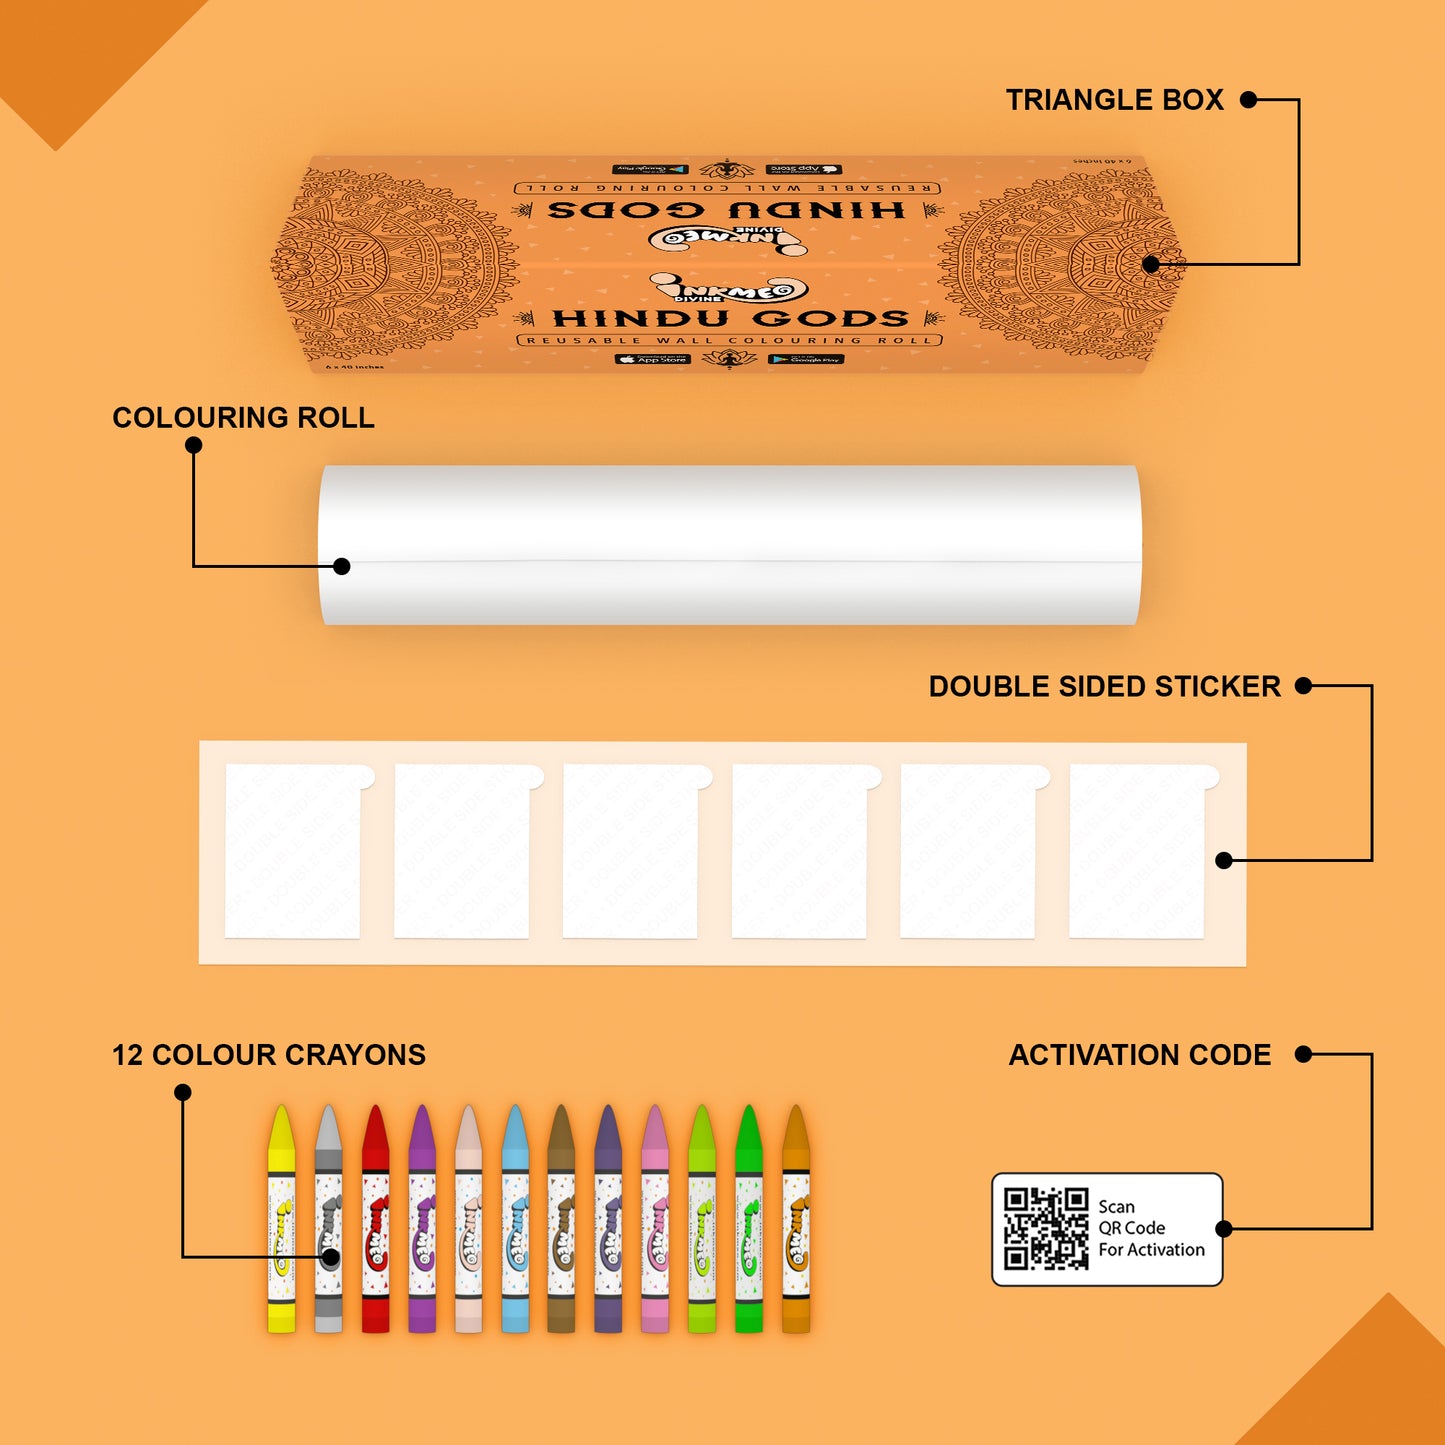 The image depicts an orange background with a single triangular box, a coloring roll, 6 double-sided stickers, 12 colored crayons, and an activation code.